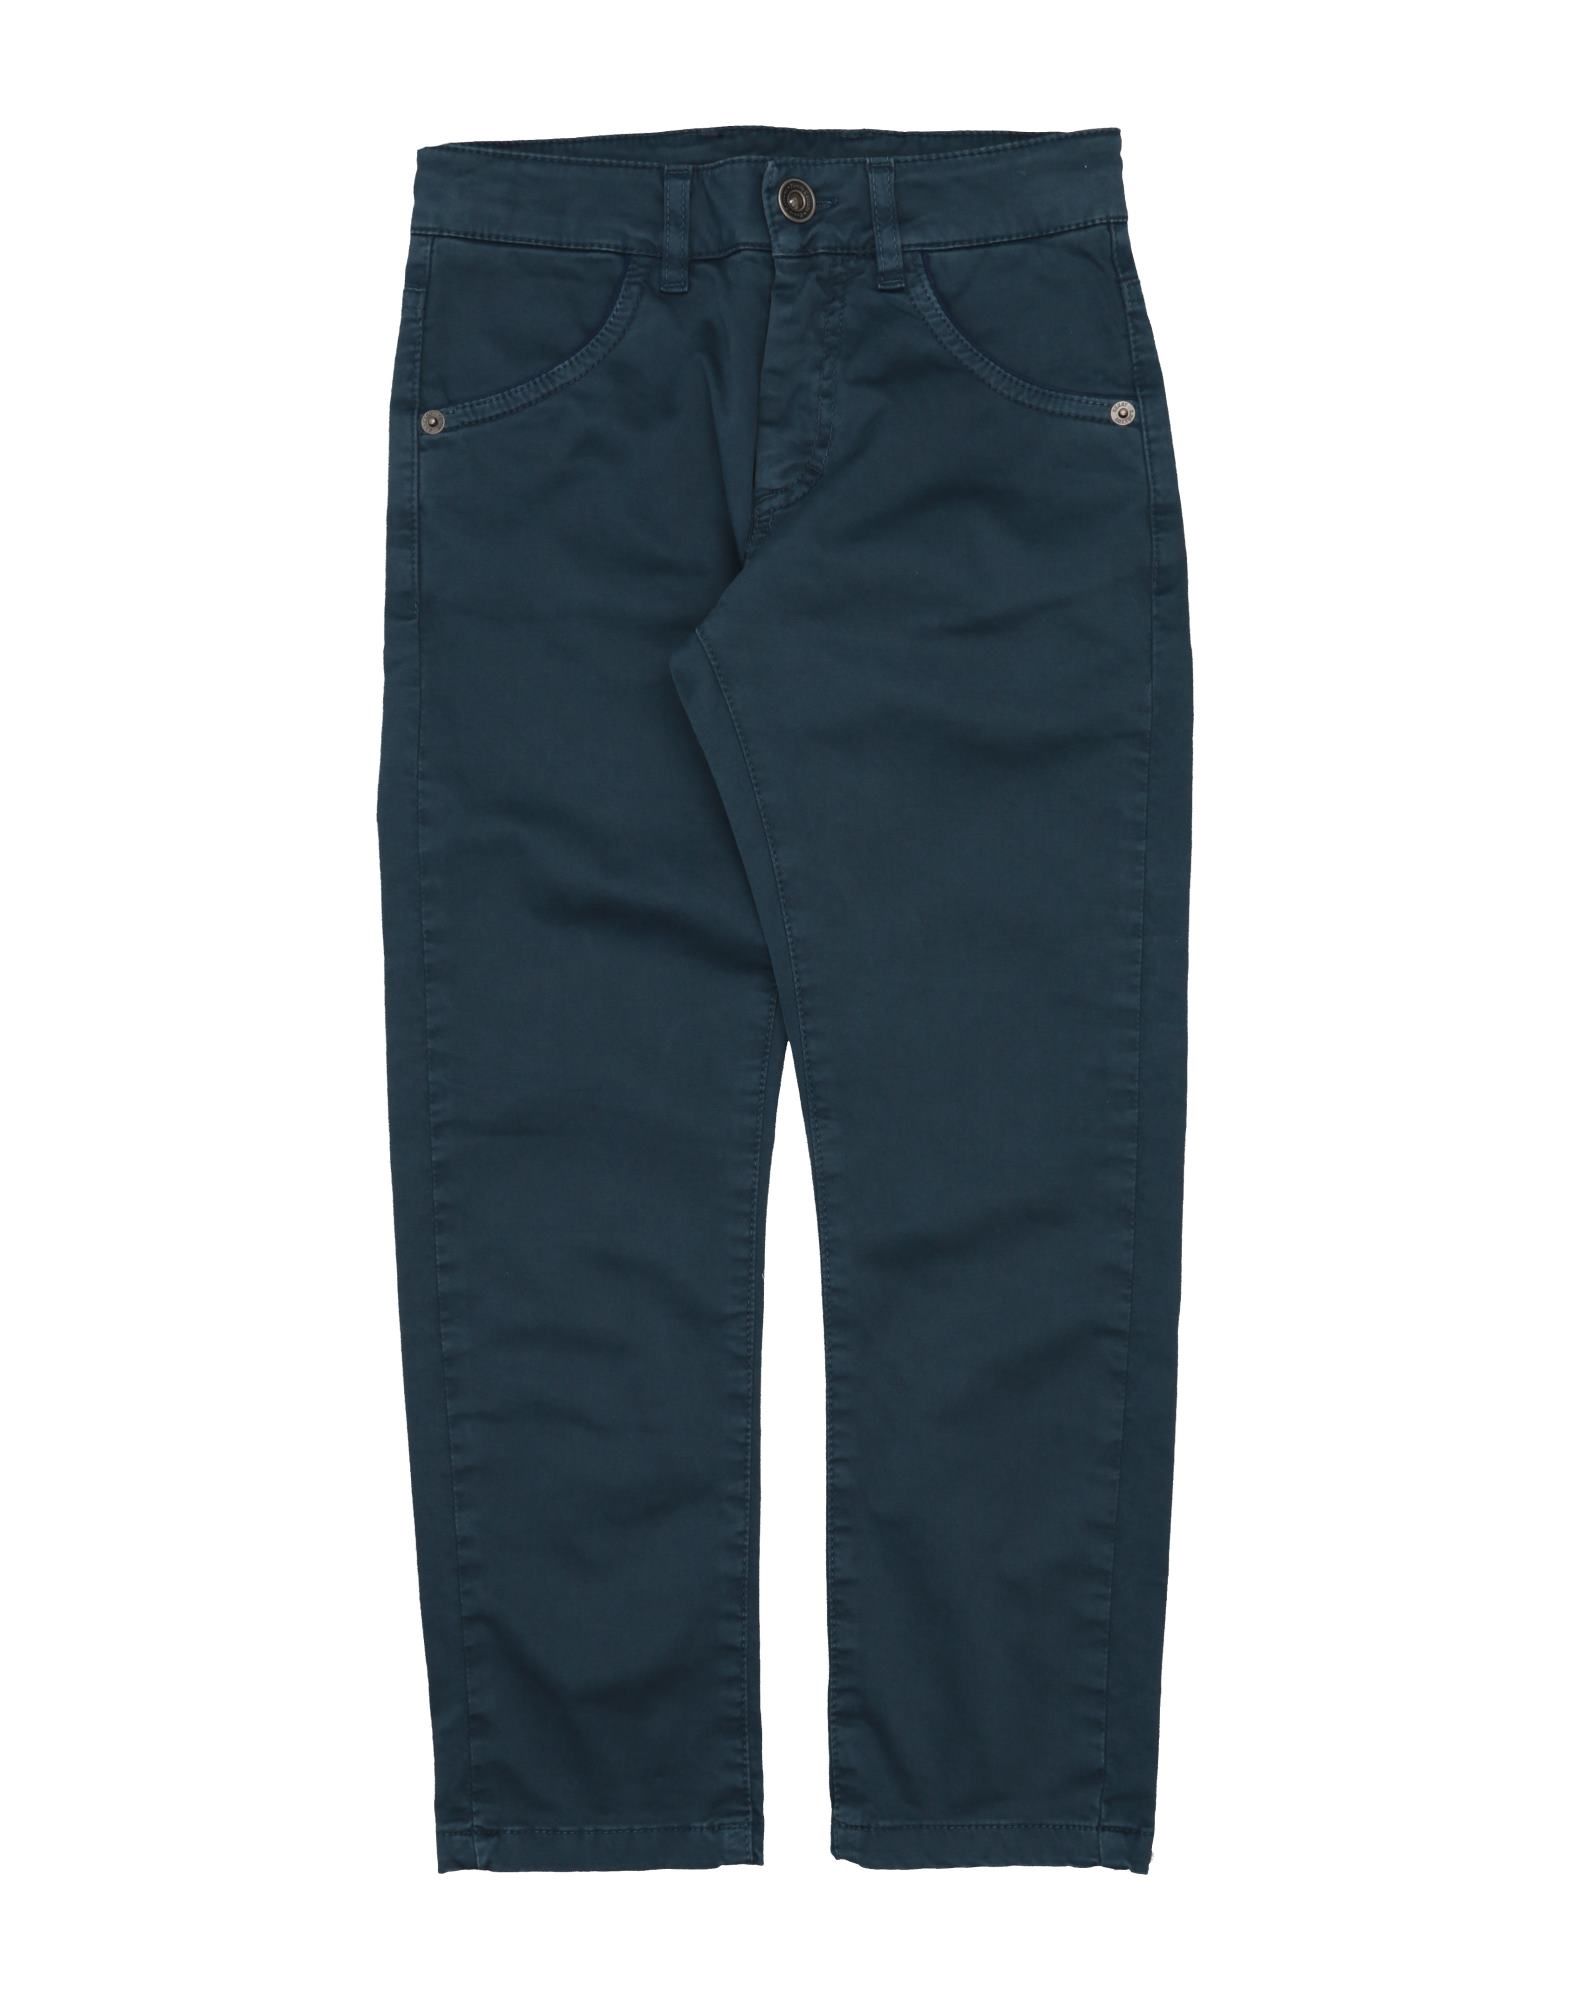 Henry Cotton's Kids' Casual Pants In Slate Blue